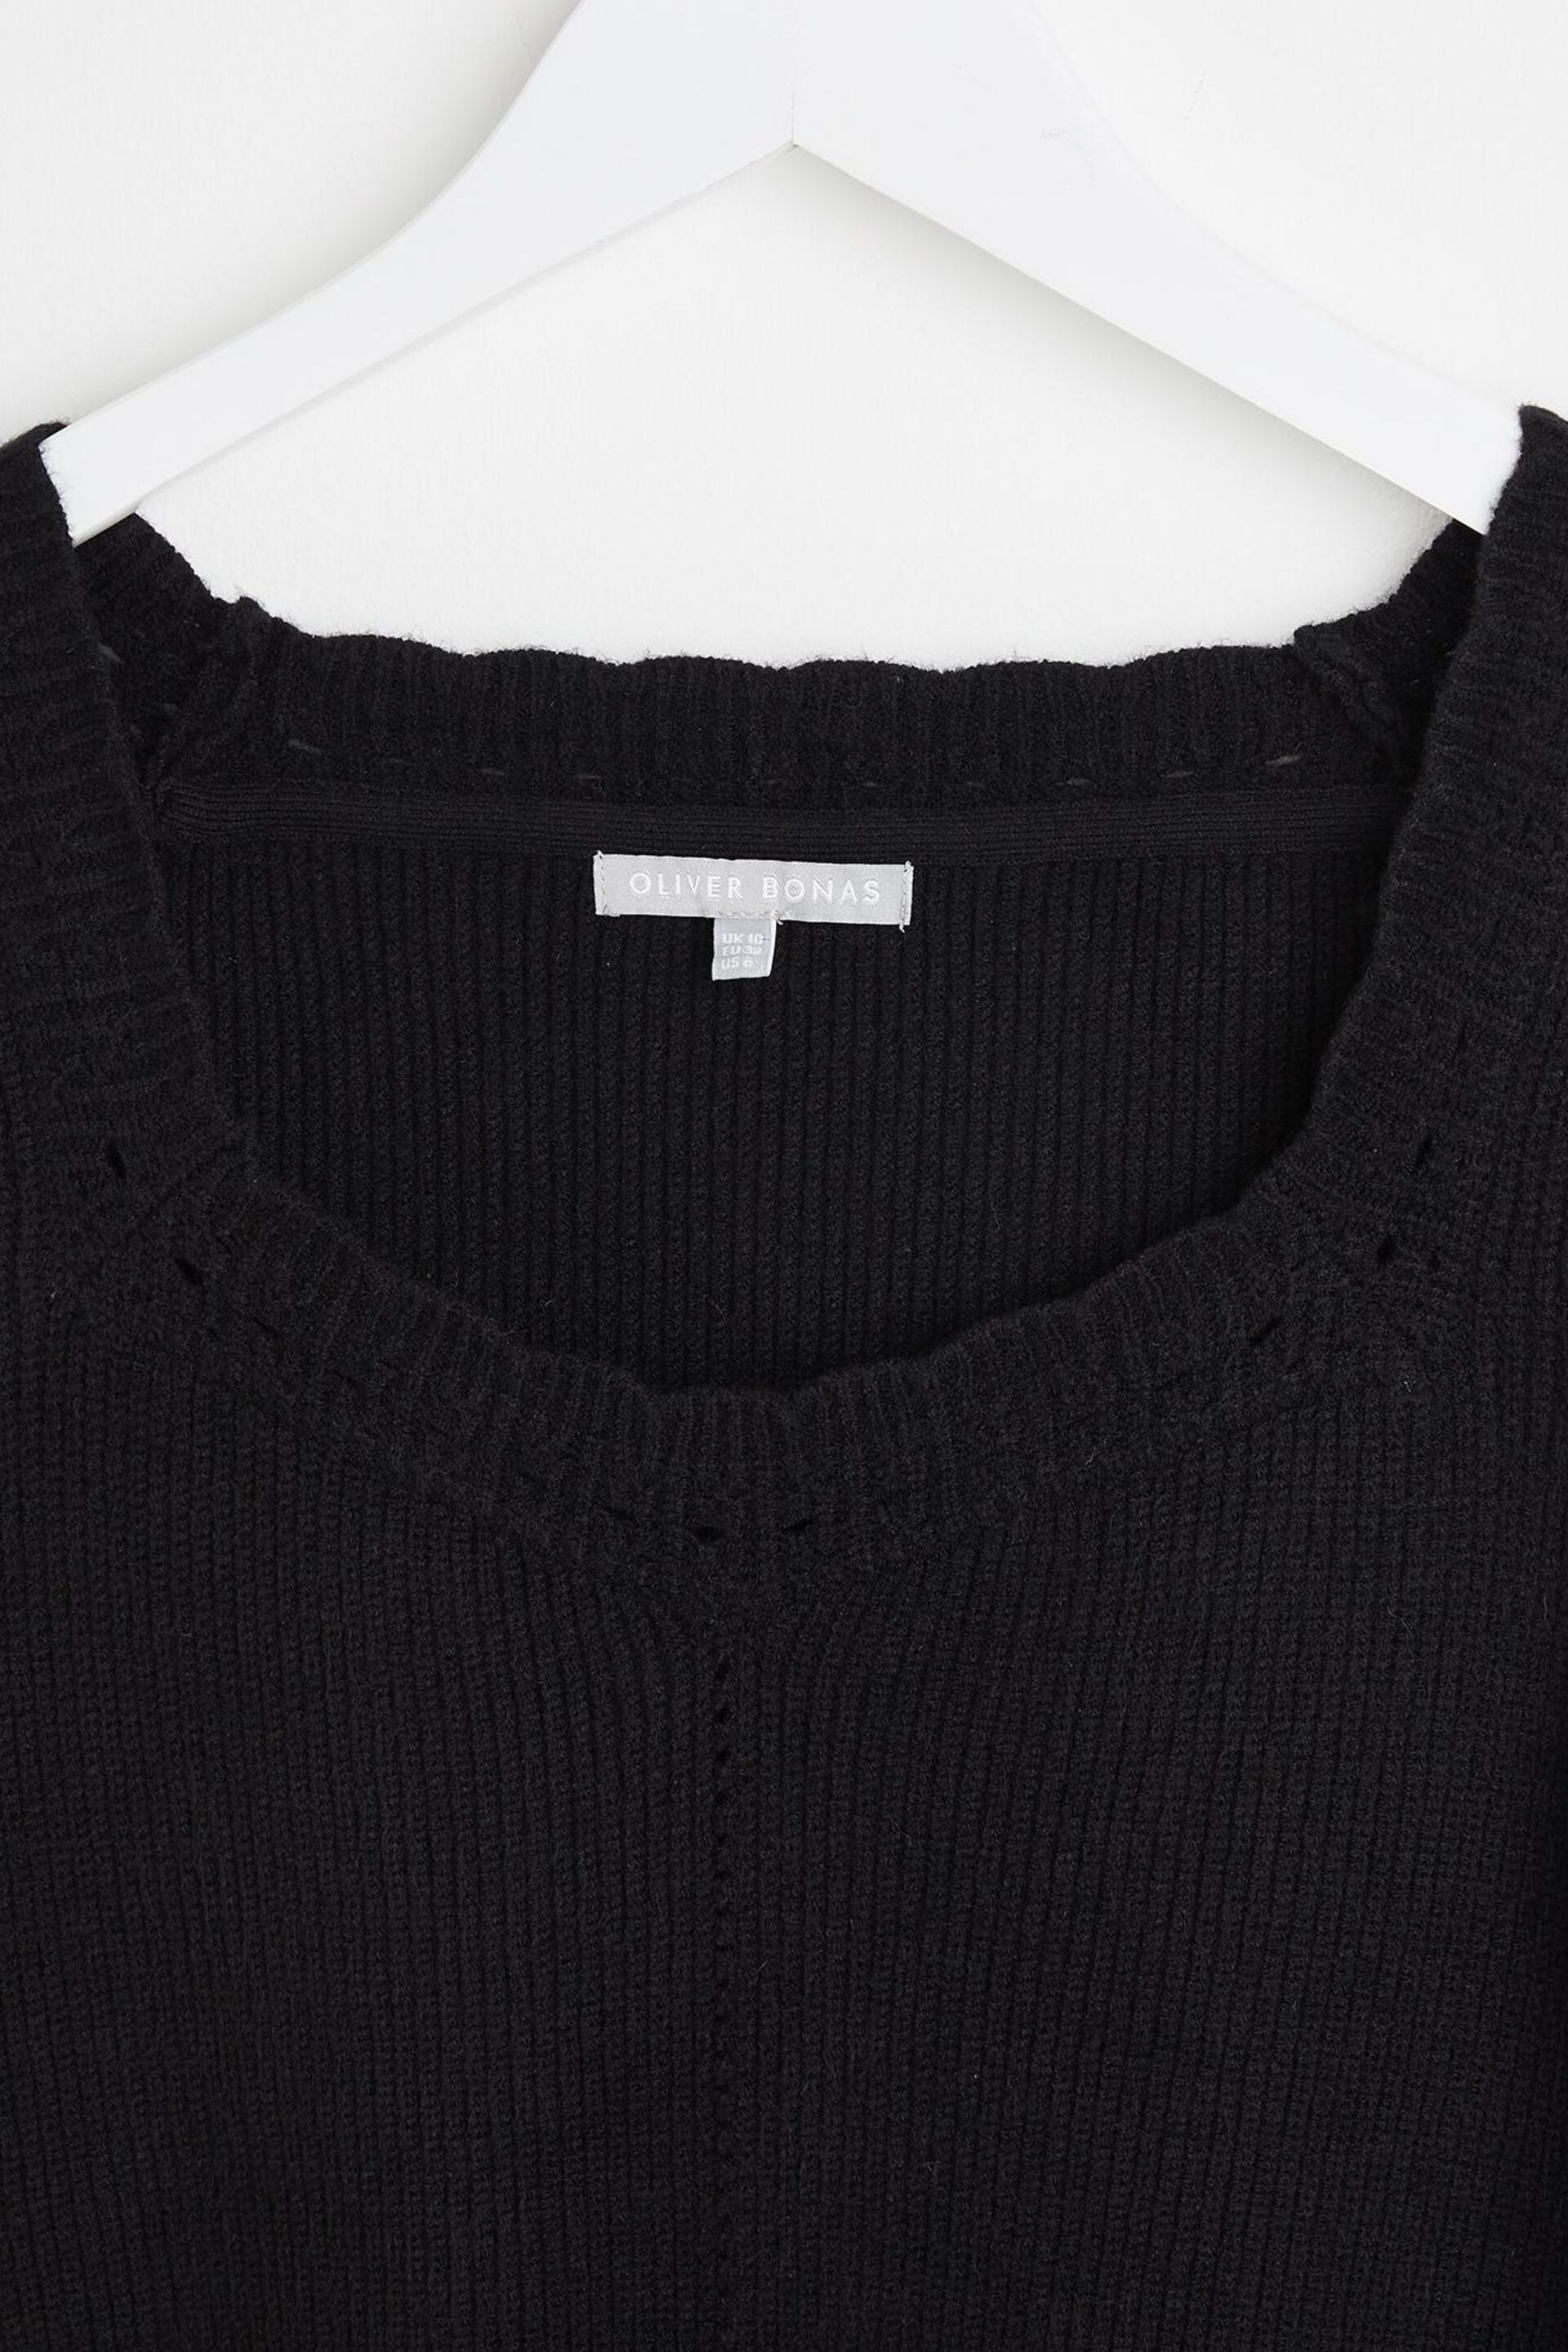 Oliver Bonas Black Scalloped Knitted Crop Top - Image 6 of 7